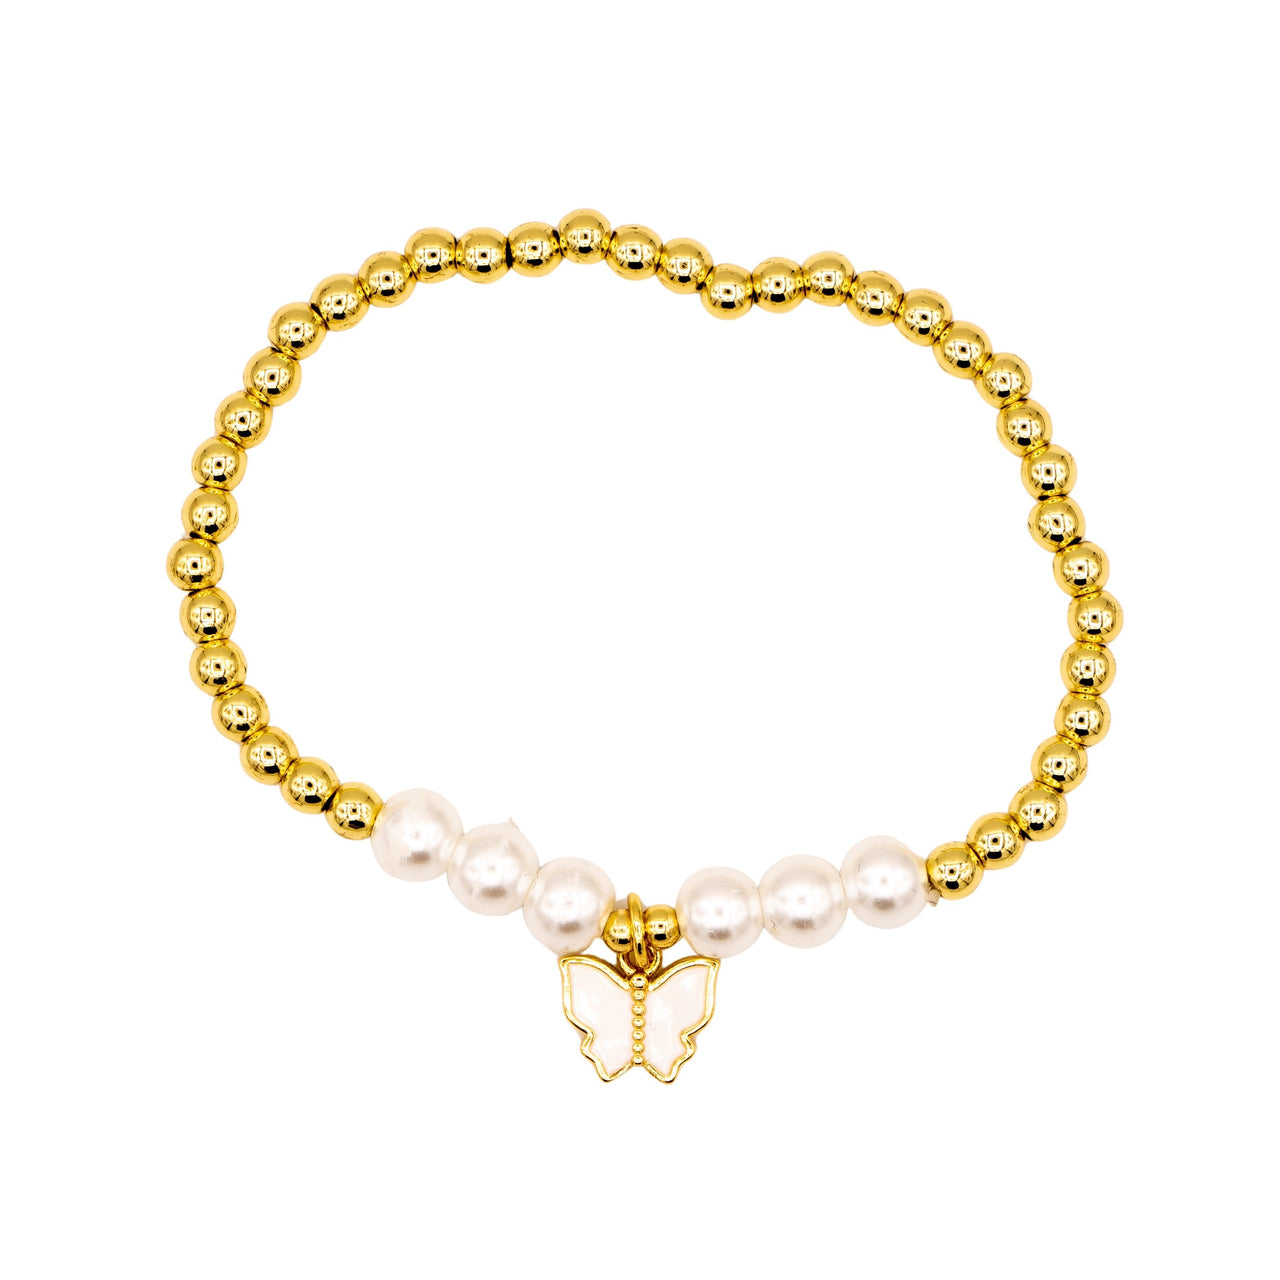 The 4mm Gold and Pearl Butterfly Beaded Bracelet